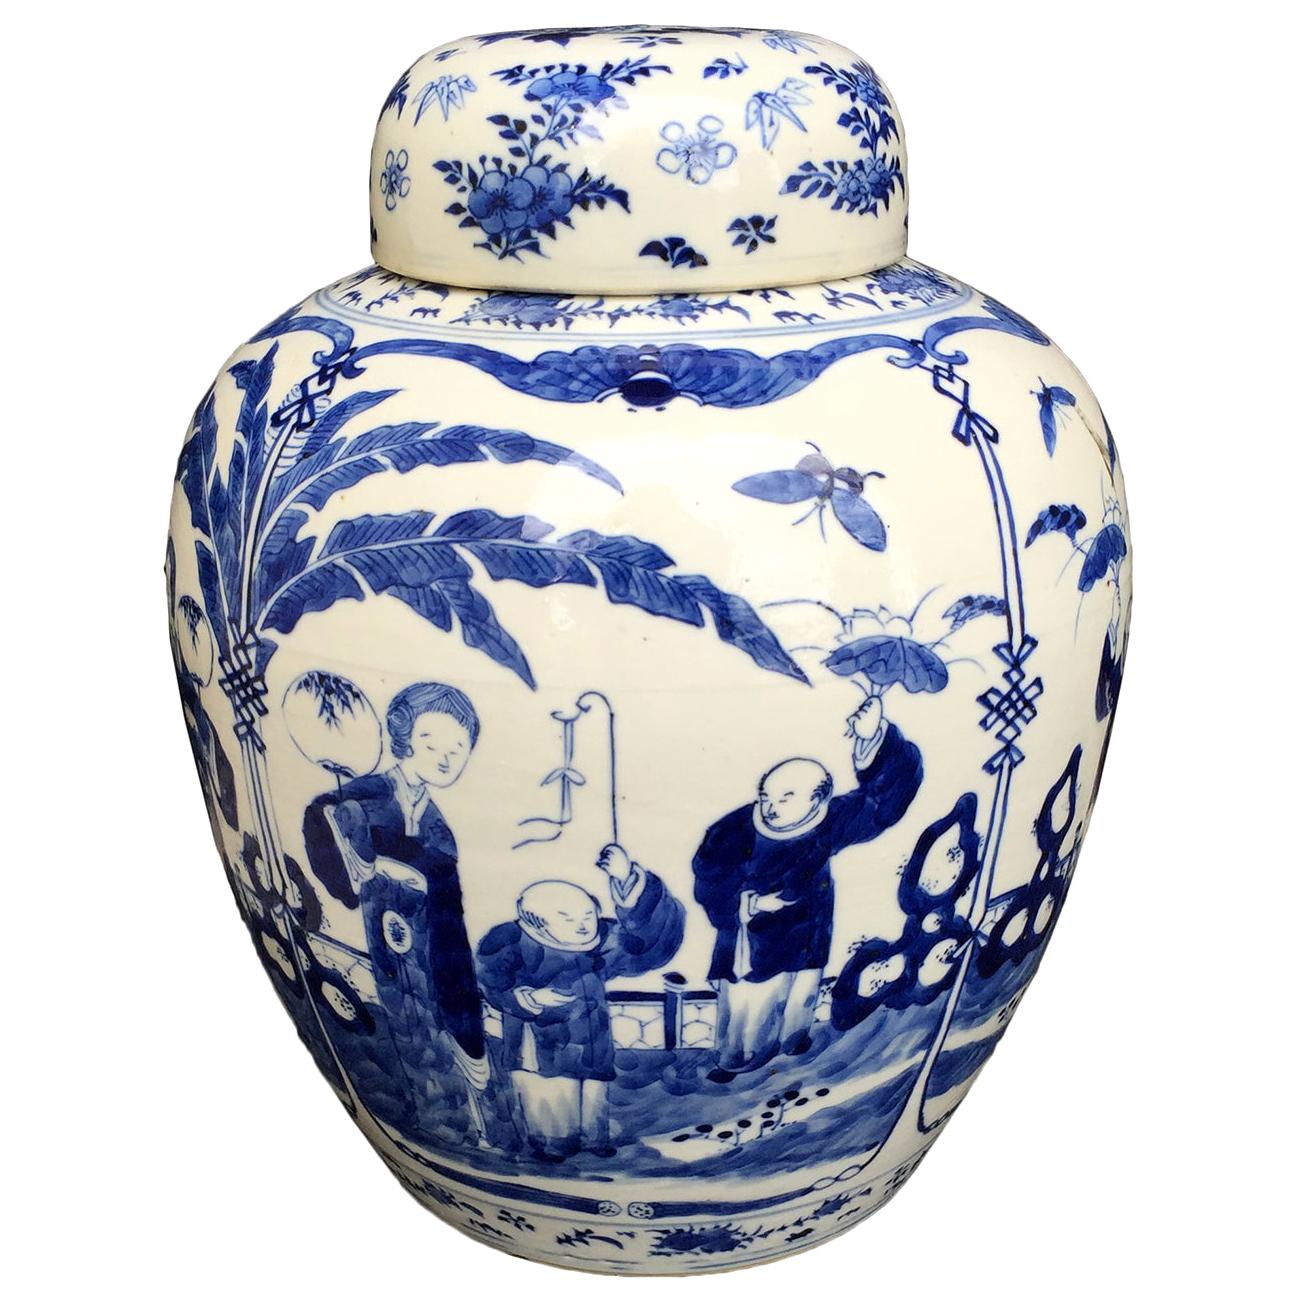 Early 20th Century Chinese Kangxi Period Blue and White Lidded Jar, Reign Marks